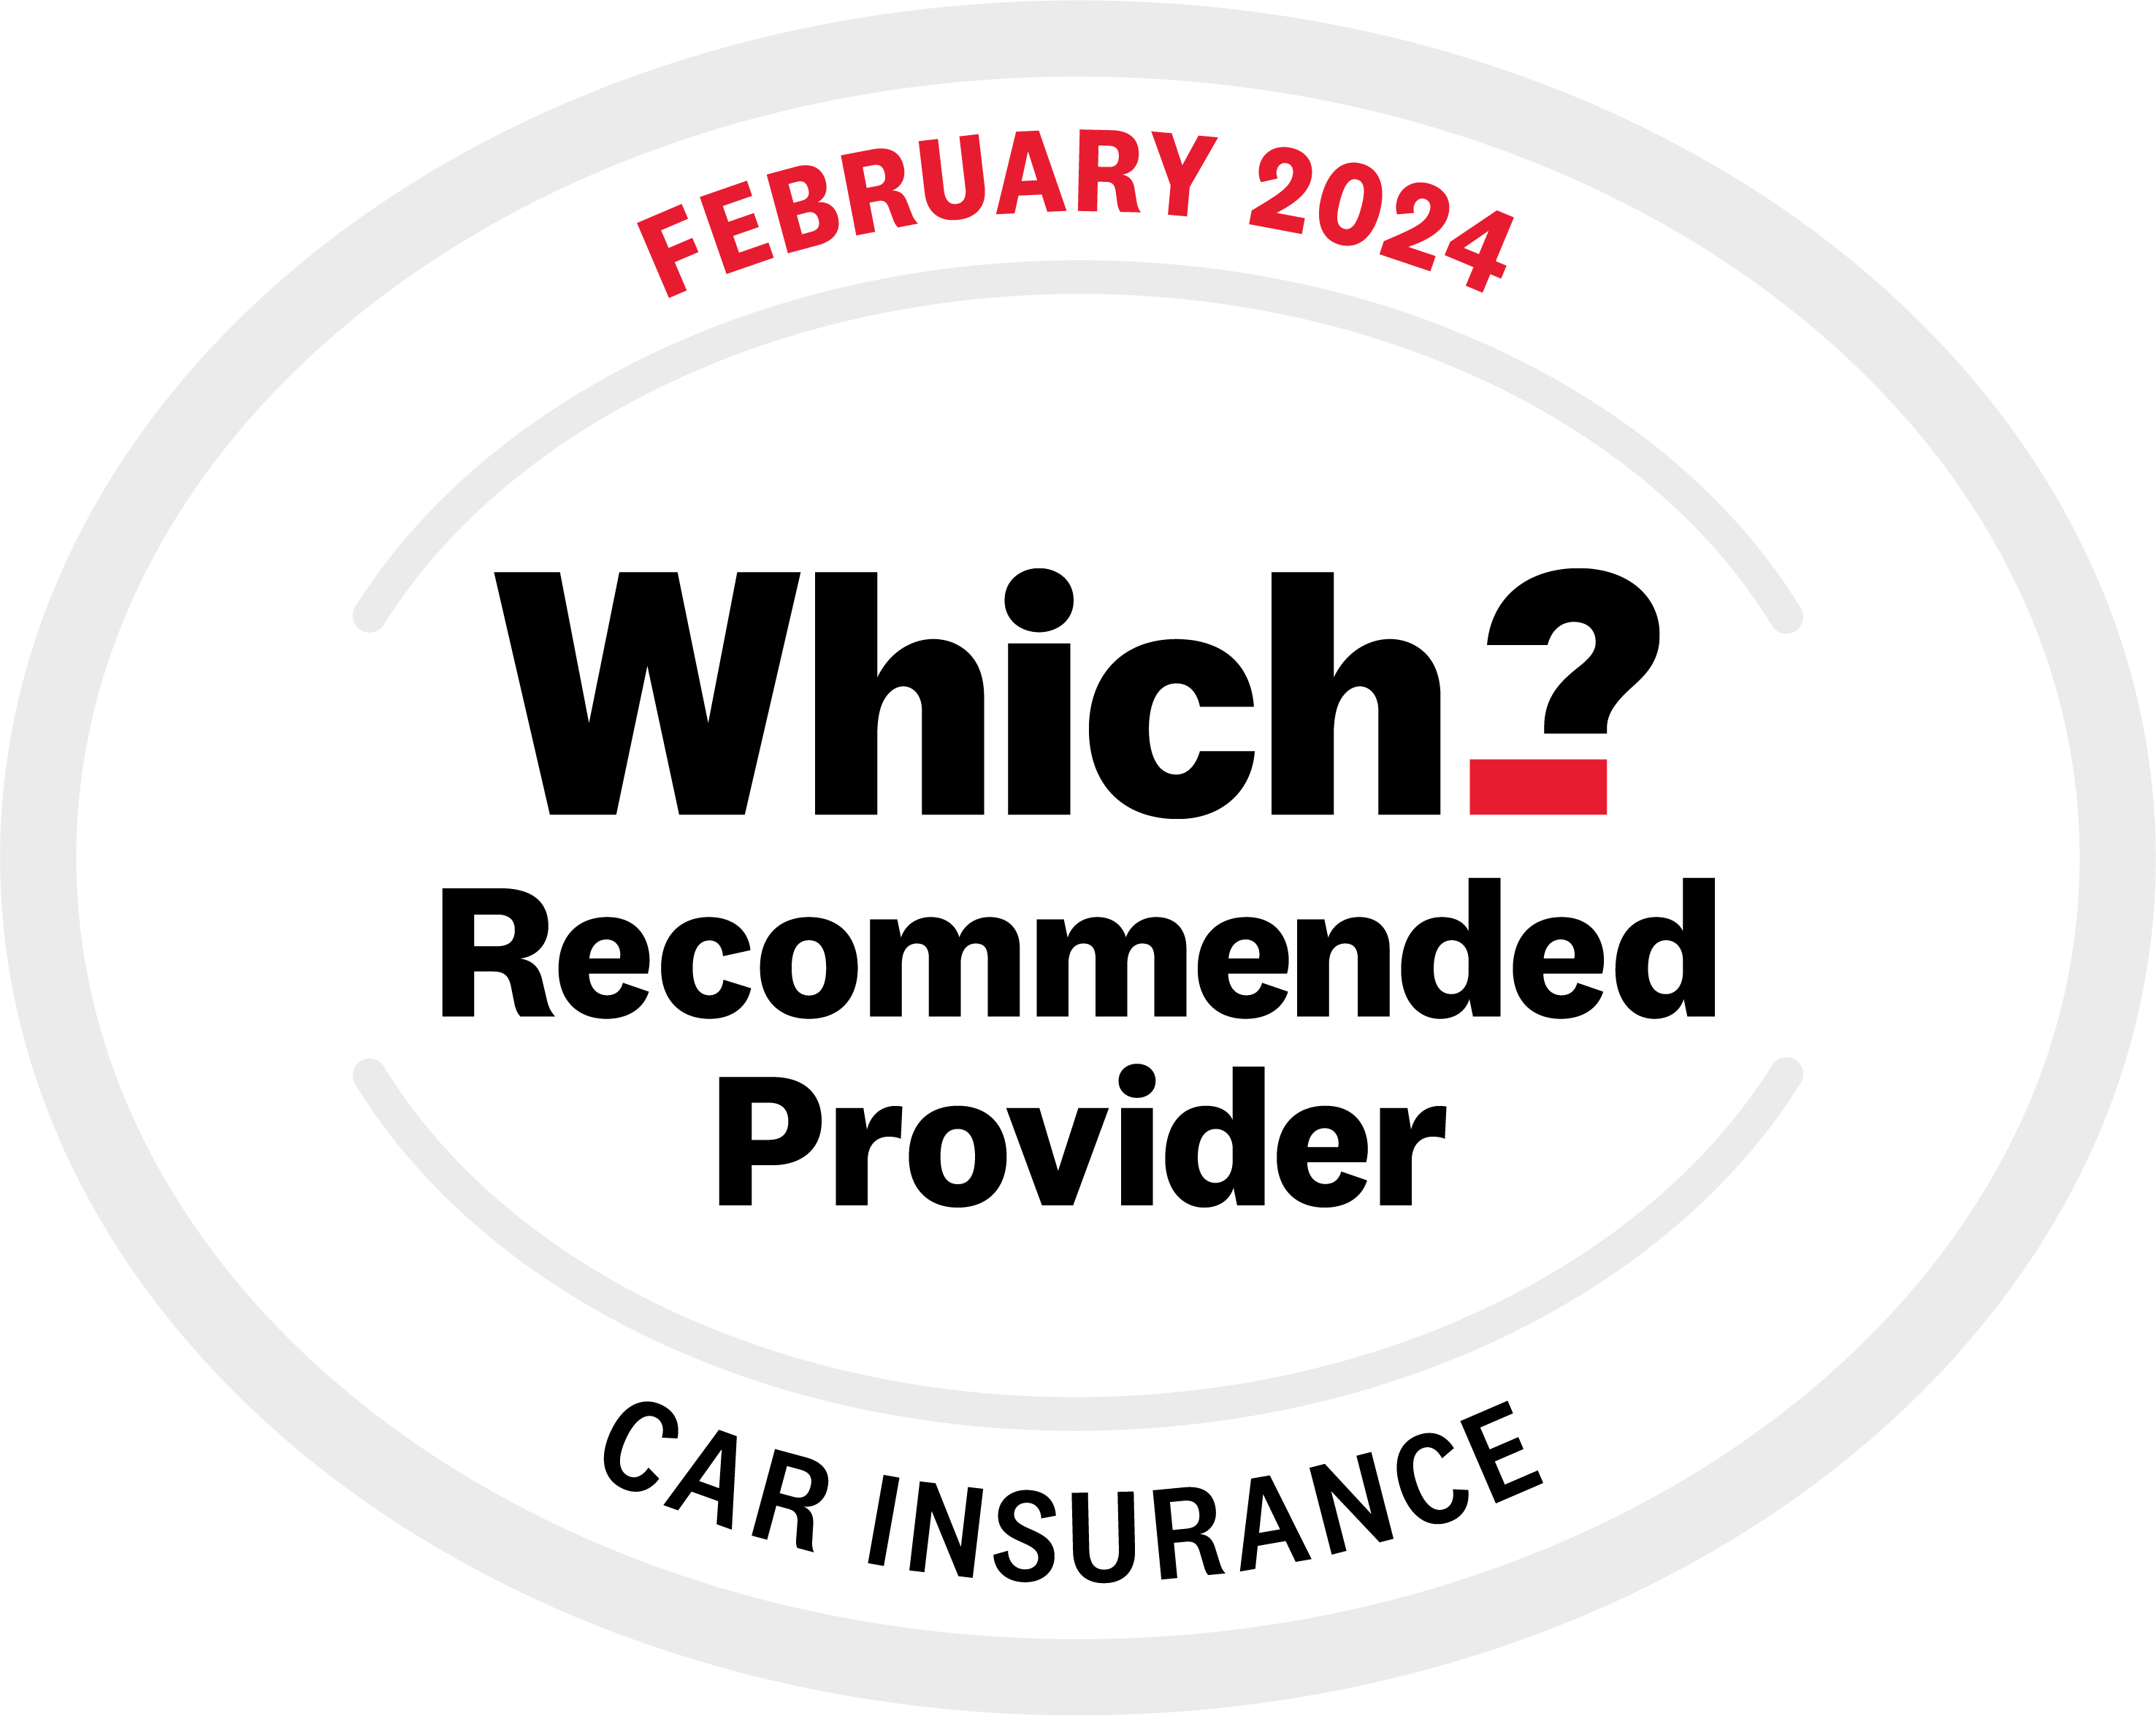 CAR INSURANCE Which recommended provider